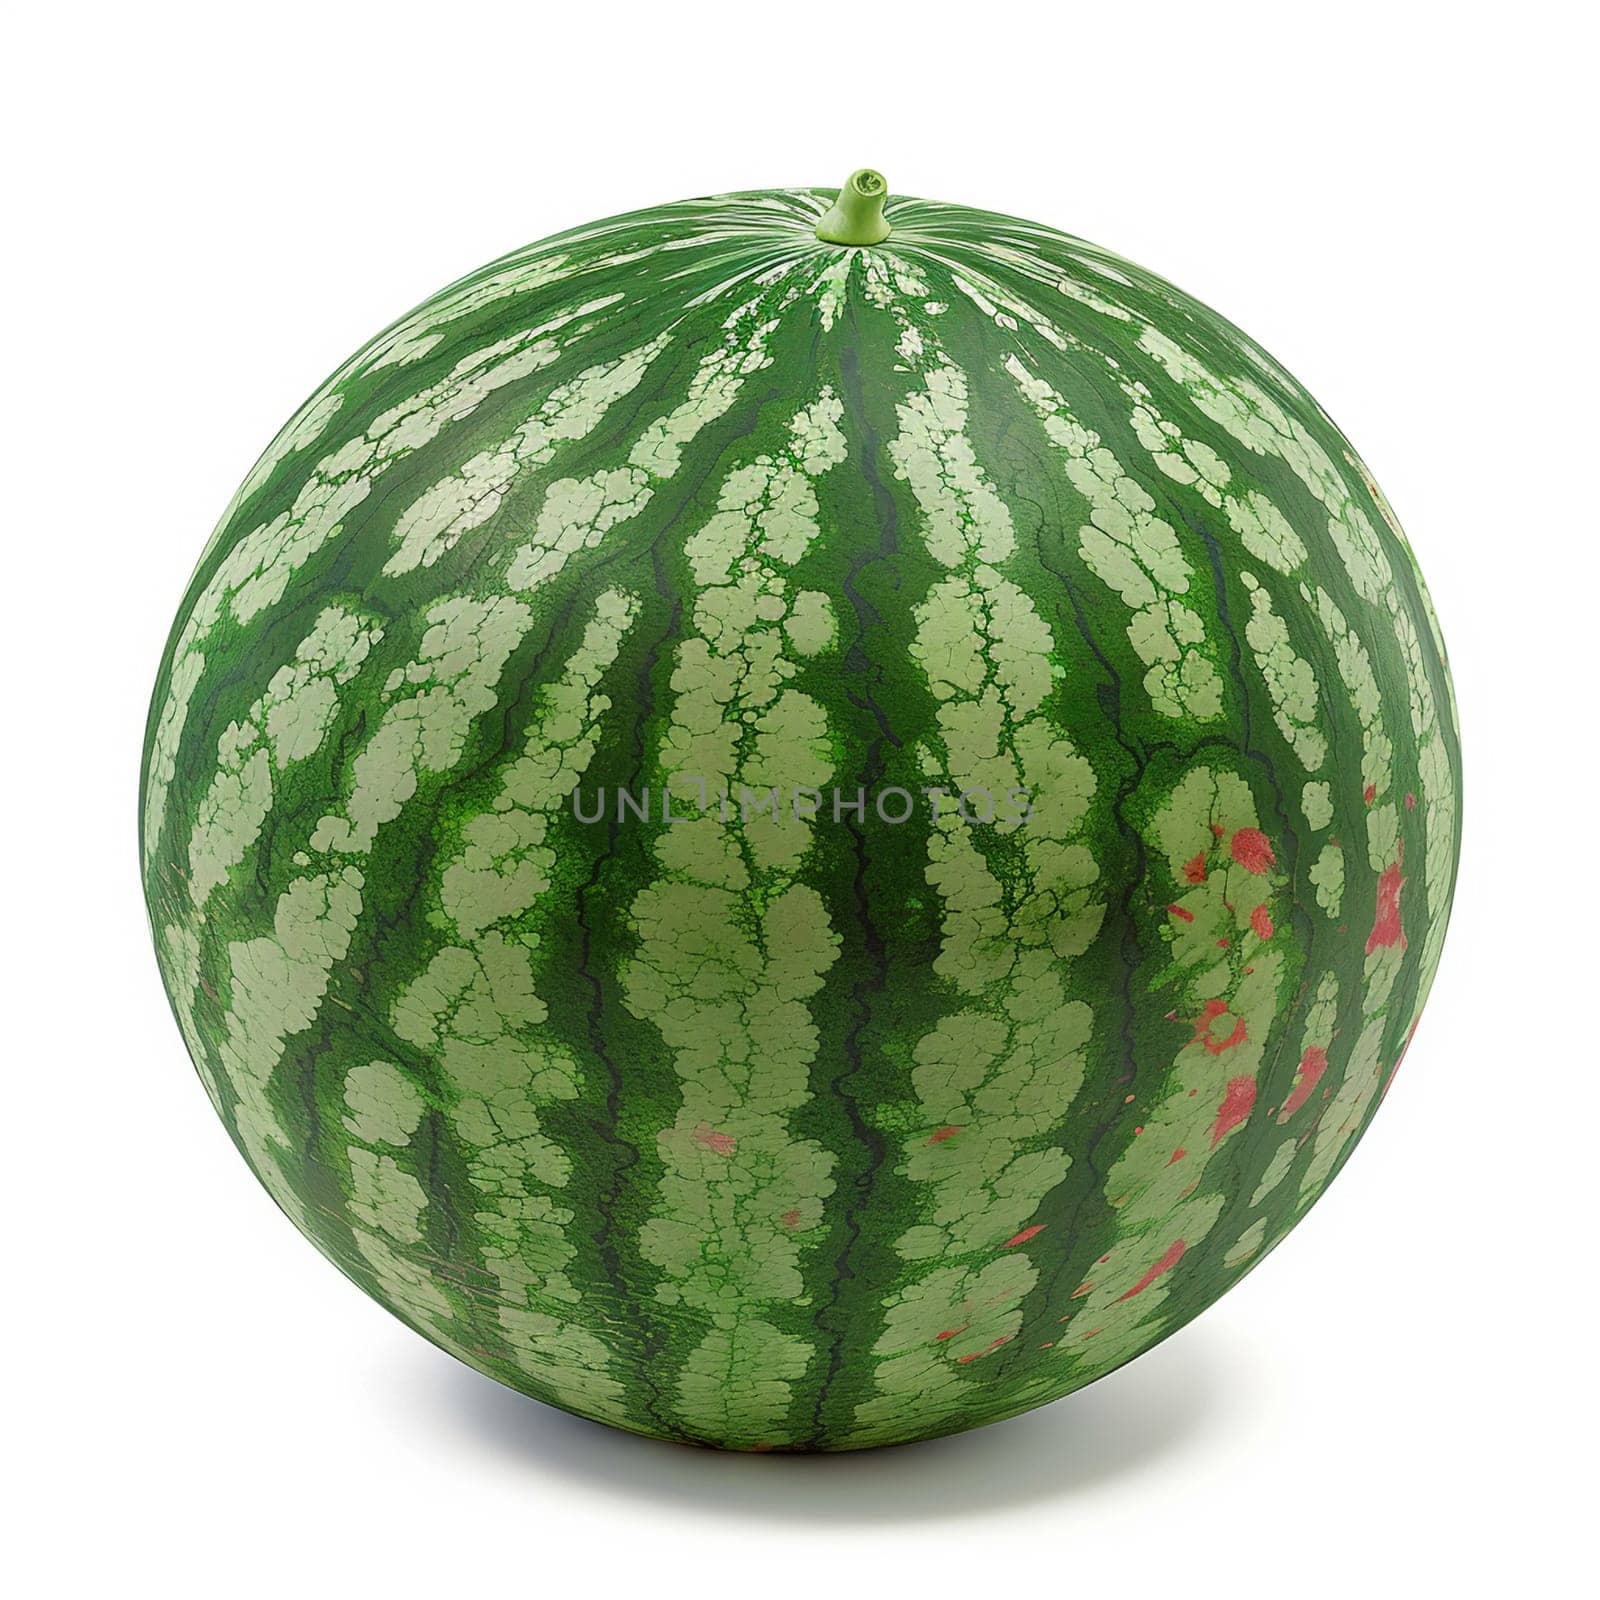 Ultra sharp image of a fresh whole watermelon, vibrant green skin with red accents, isolated on white background.